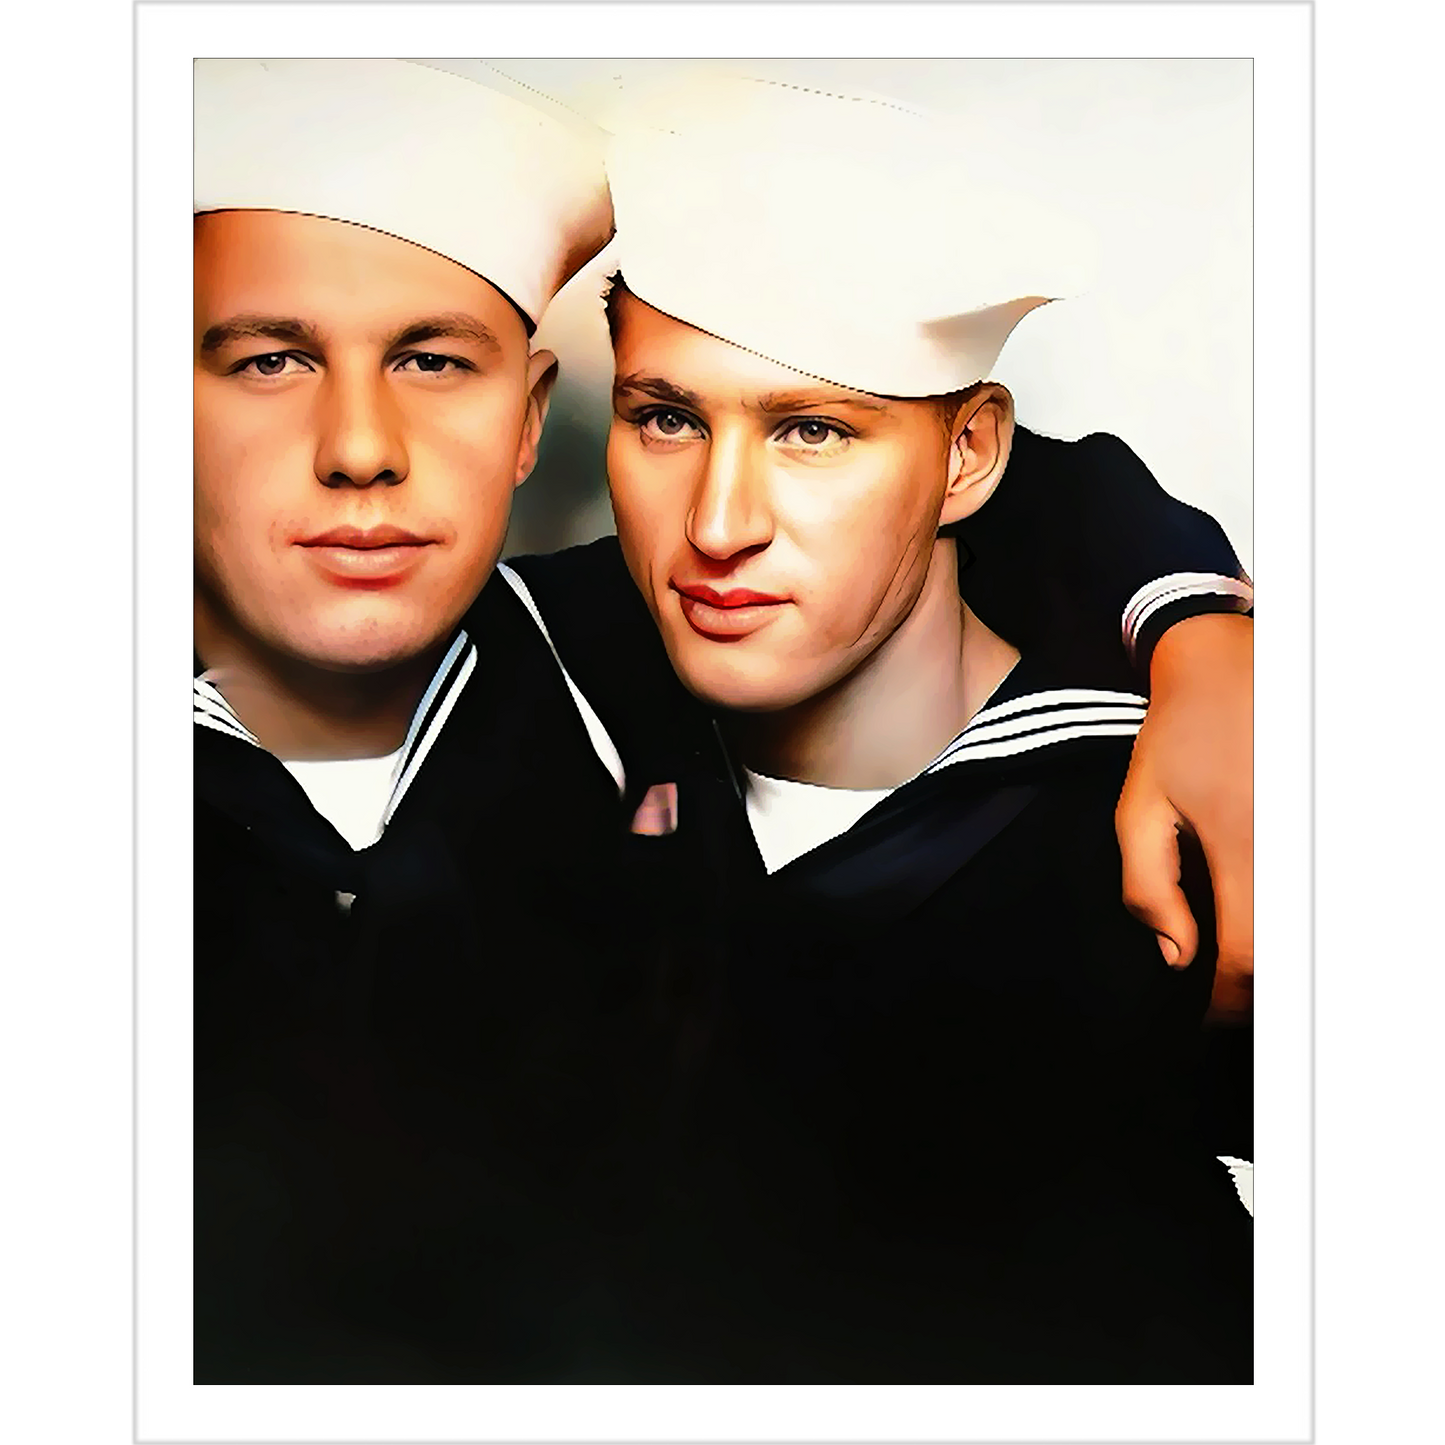 paire 078 | Giclee Artist Print Gay Boston Sailor Photobooth Vintage Affectionate Men Queer LGBTQ